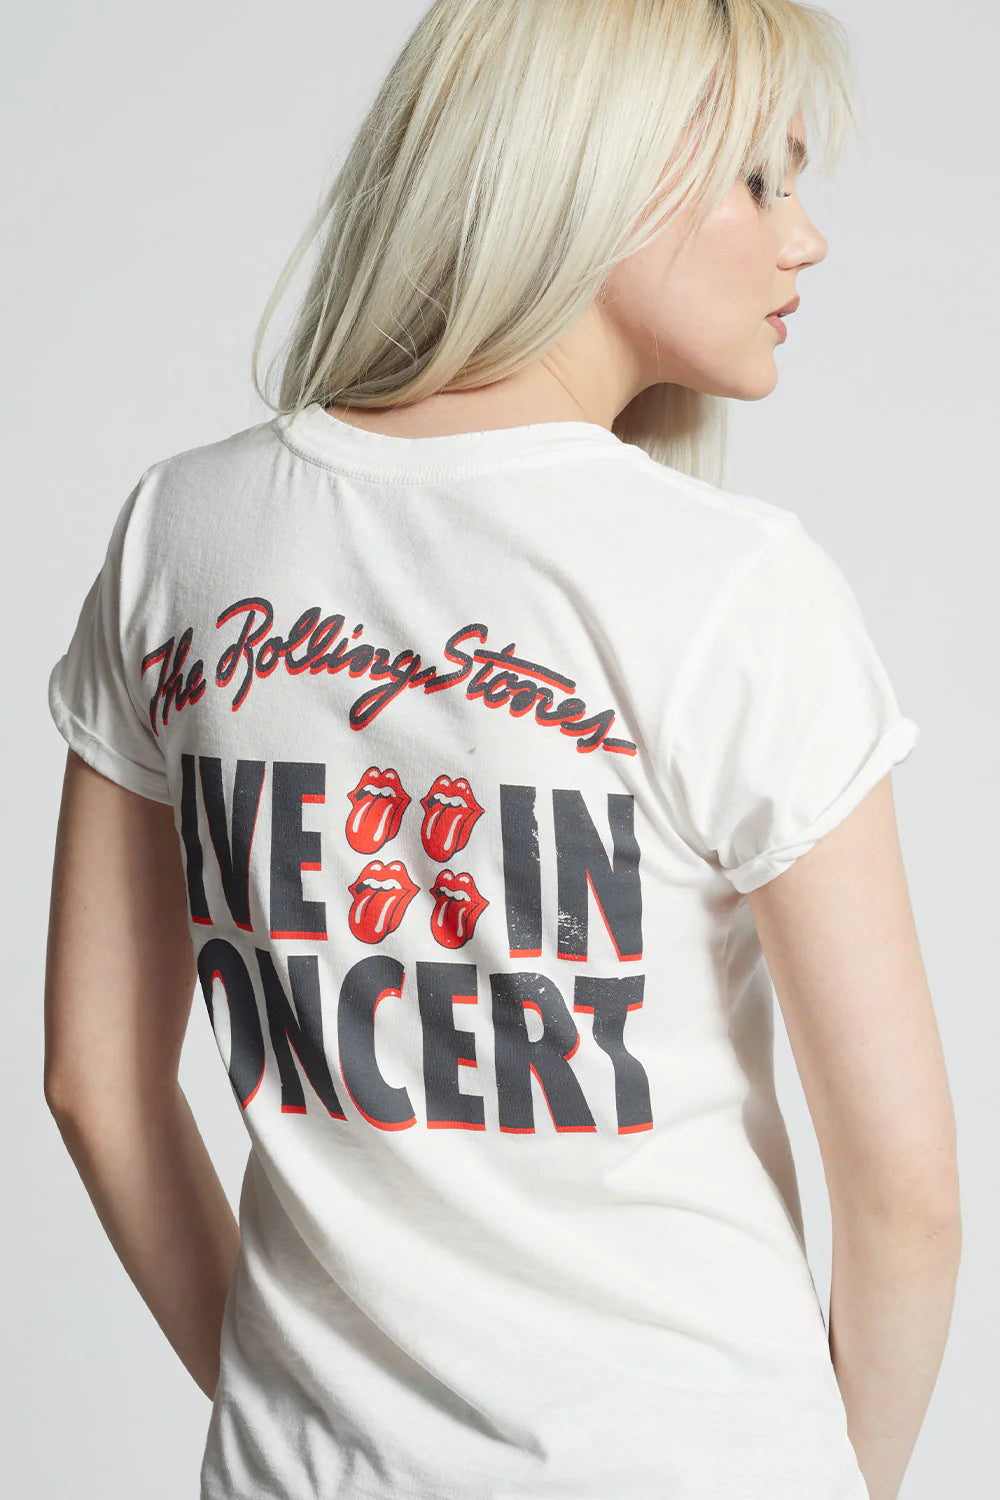 Recycled Karma The Rolling Stones Live in Concert Tee